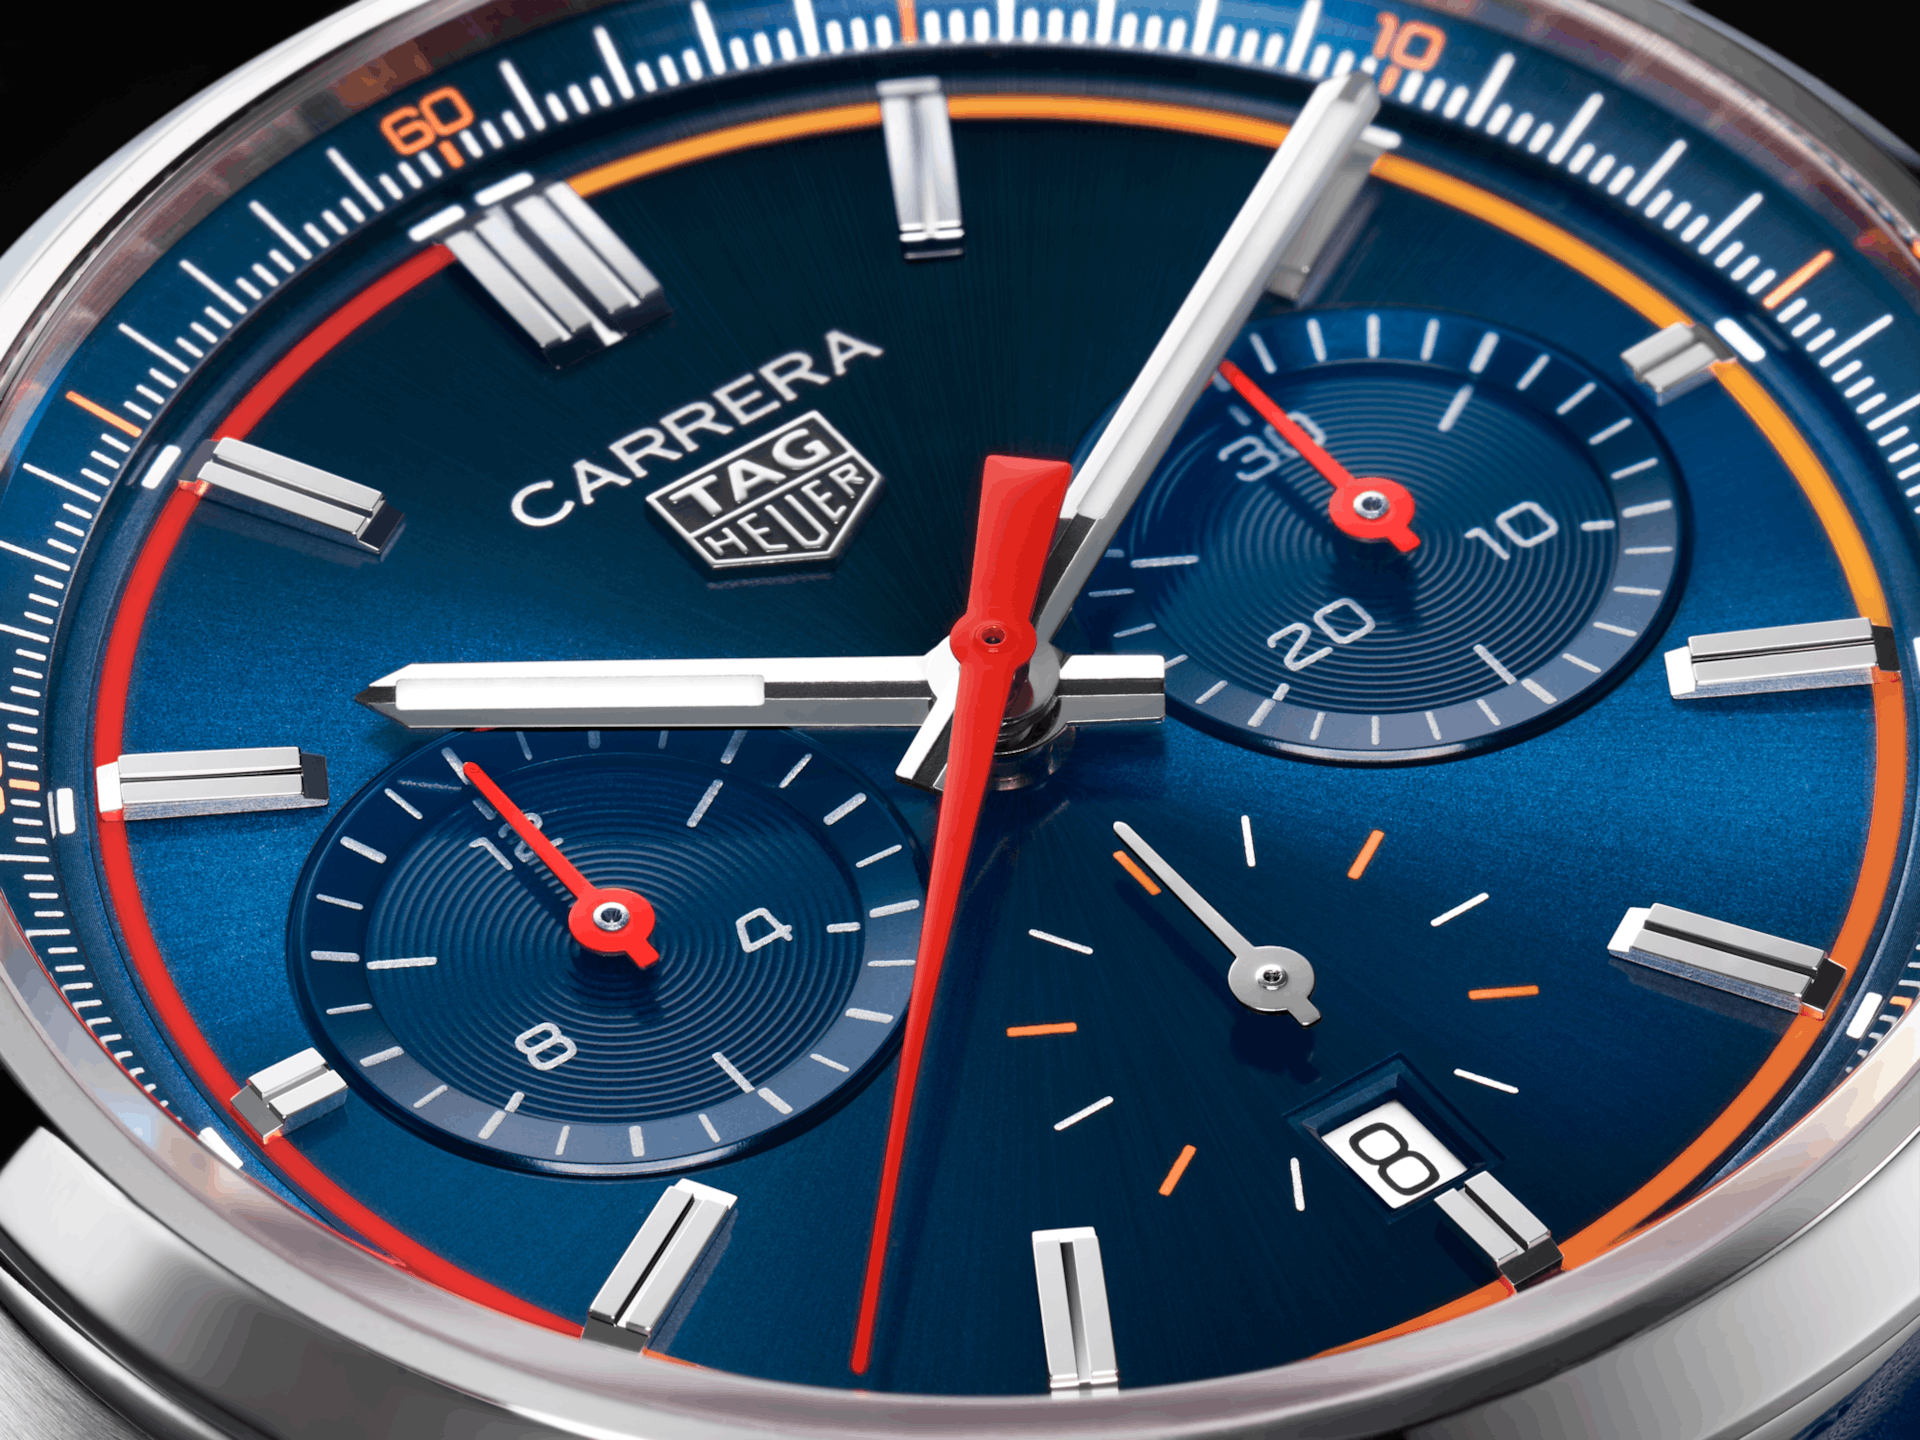 Dark blue dialled Tag hehuer carrera chronograph close up with bright red chronograph seconds hand, straight lumed steel hour and minude hands, and red and organe accents on the dial  inutes trach and the seconds subdial, with a small date window at the 6 o'clock position.